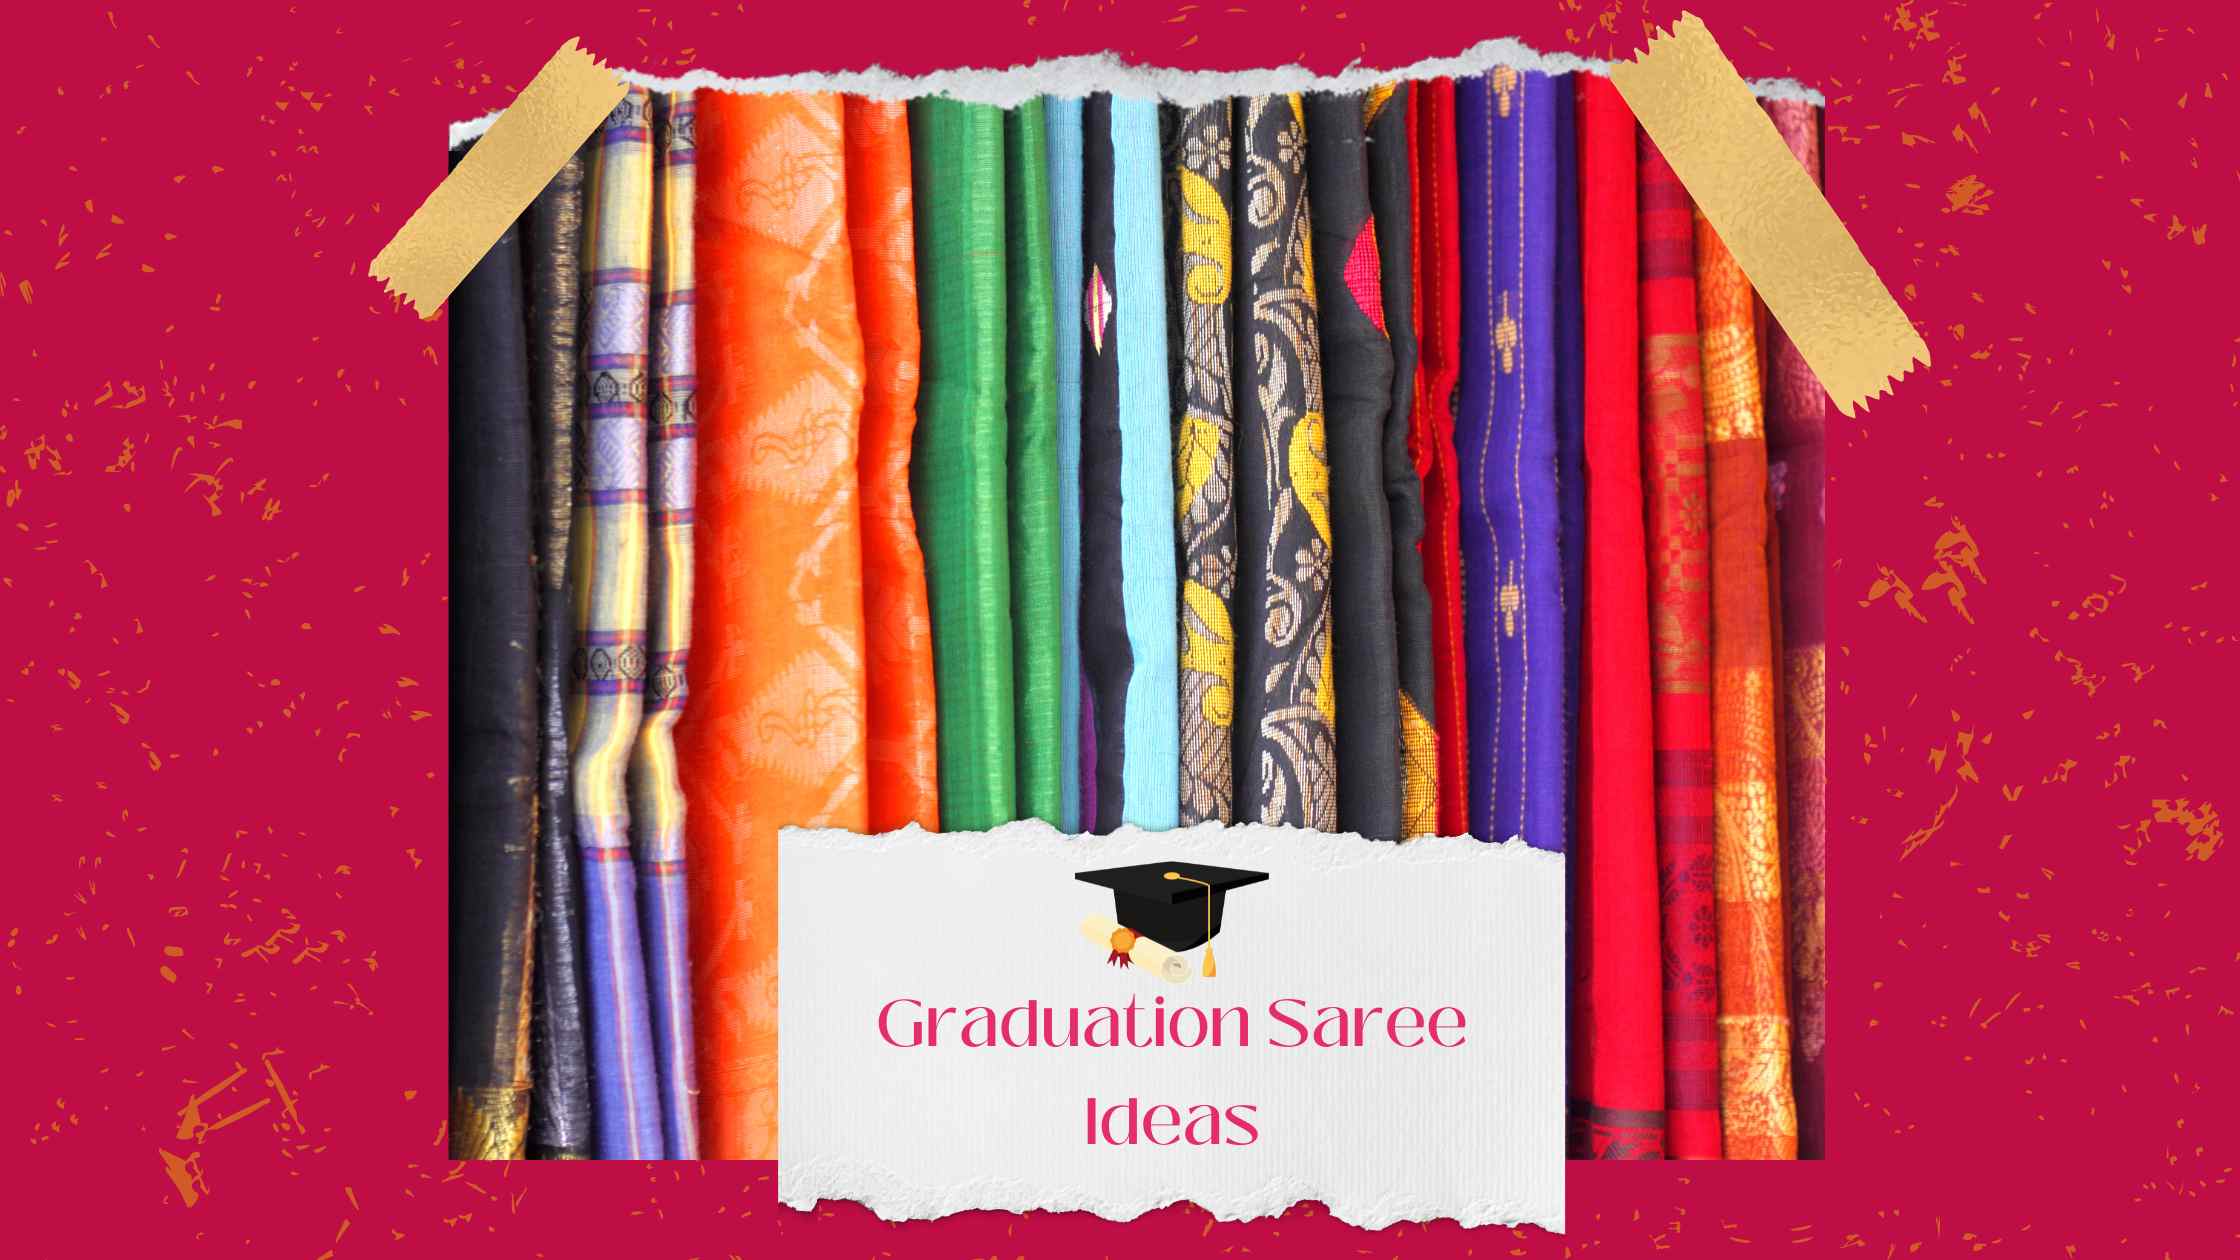 Which type of Saree is suitable for Graduation day